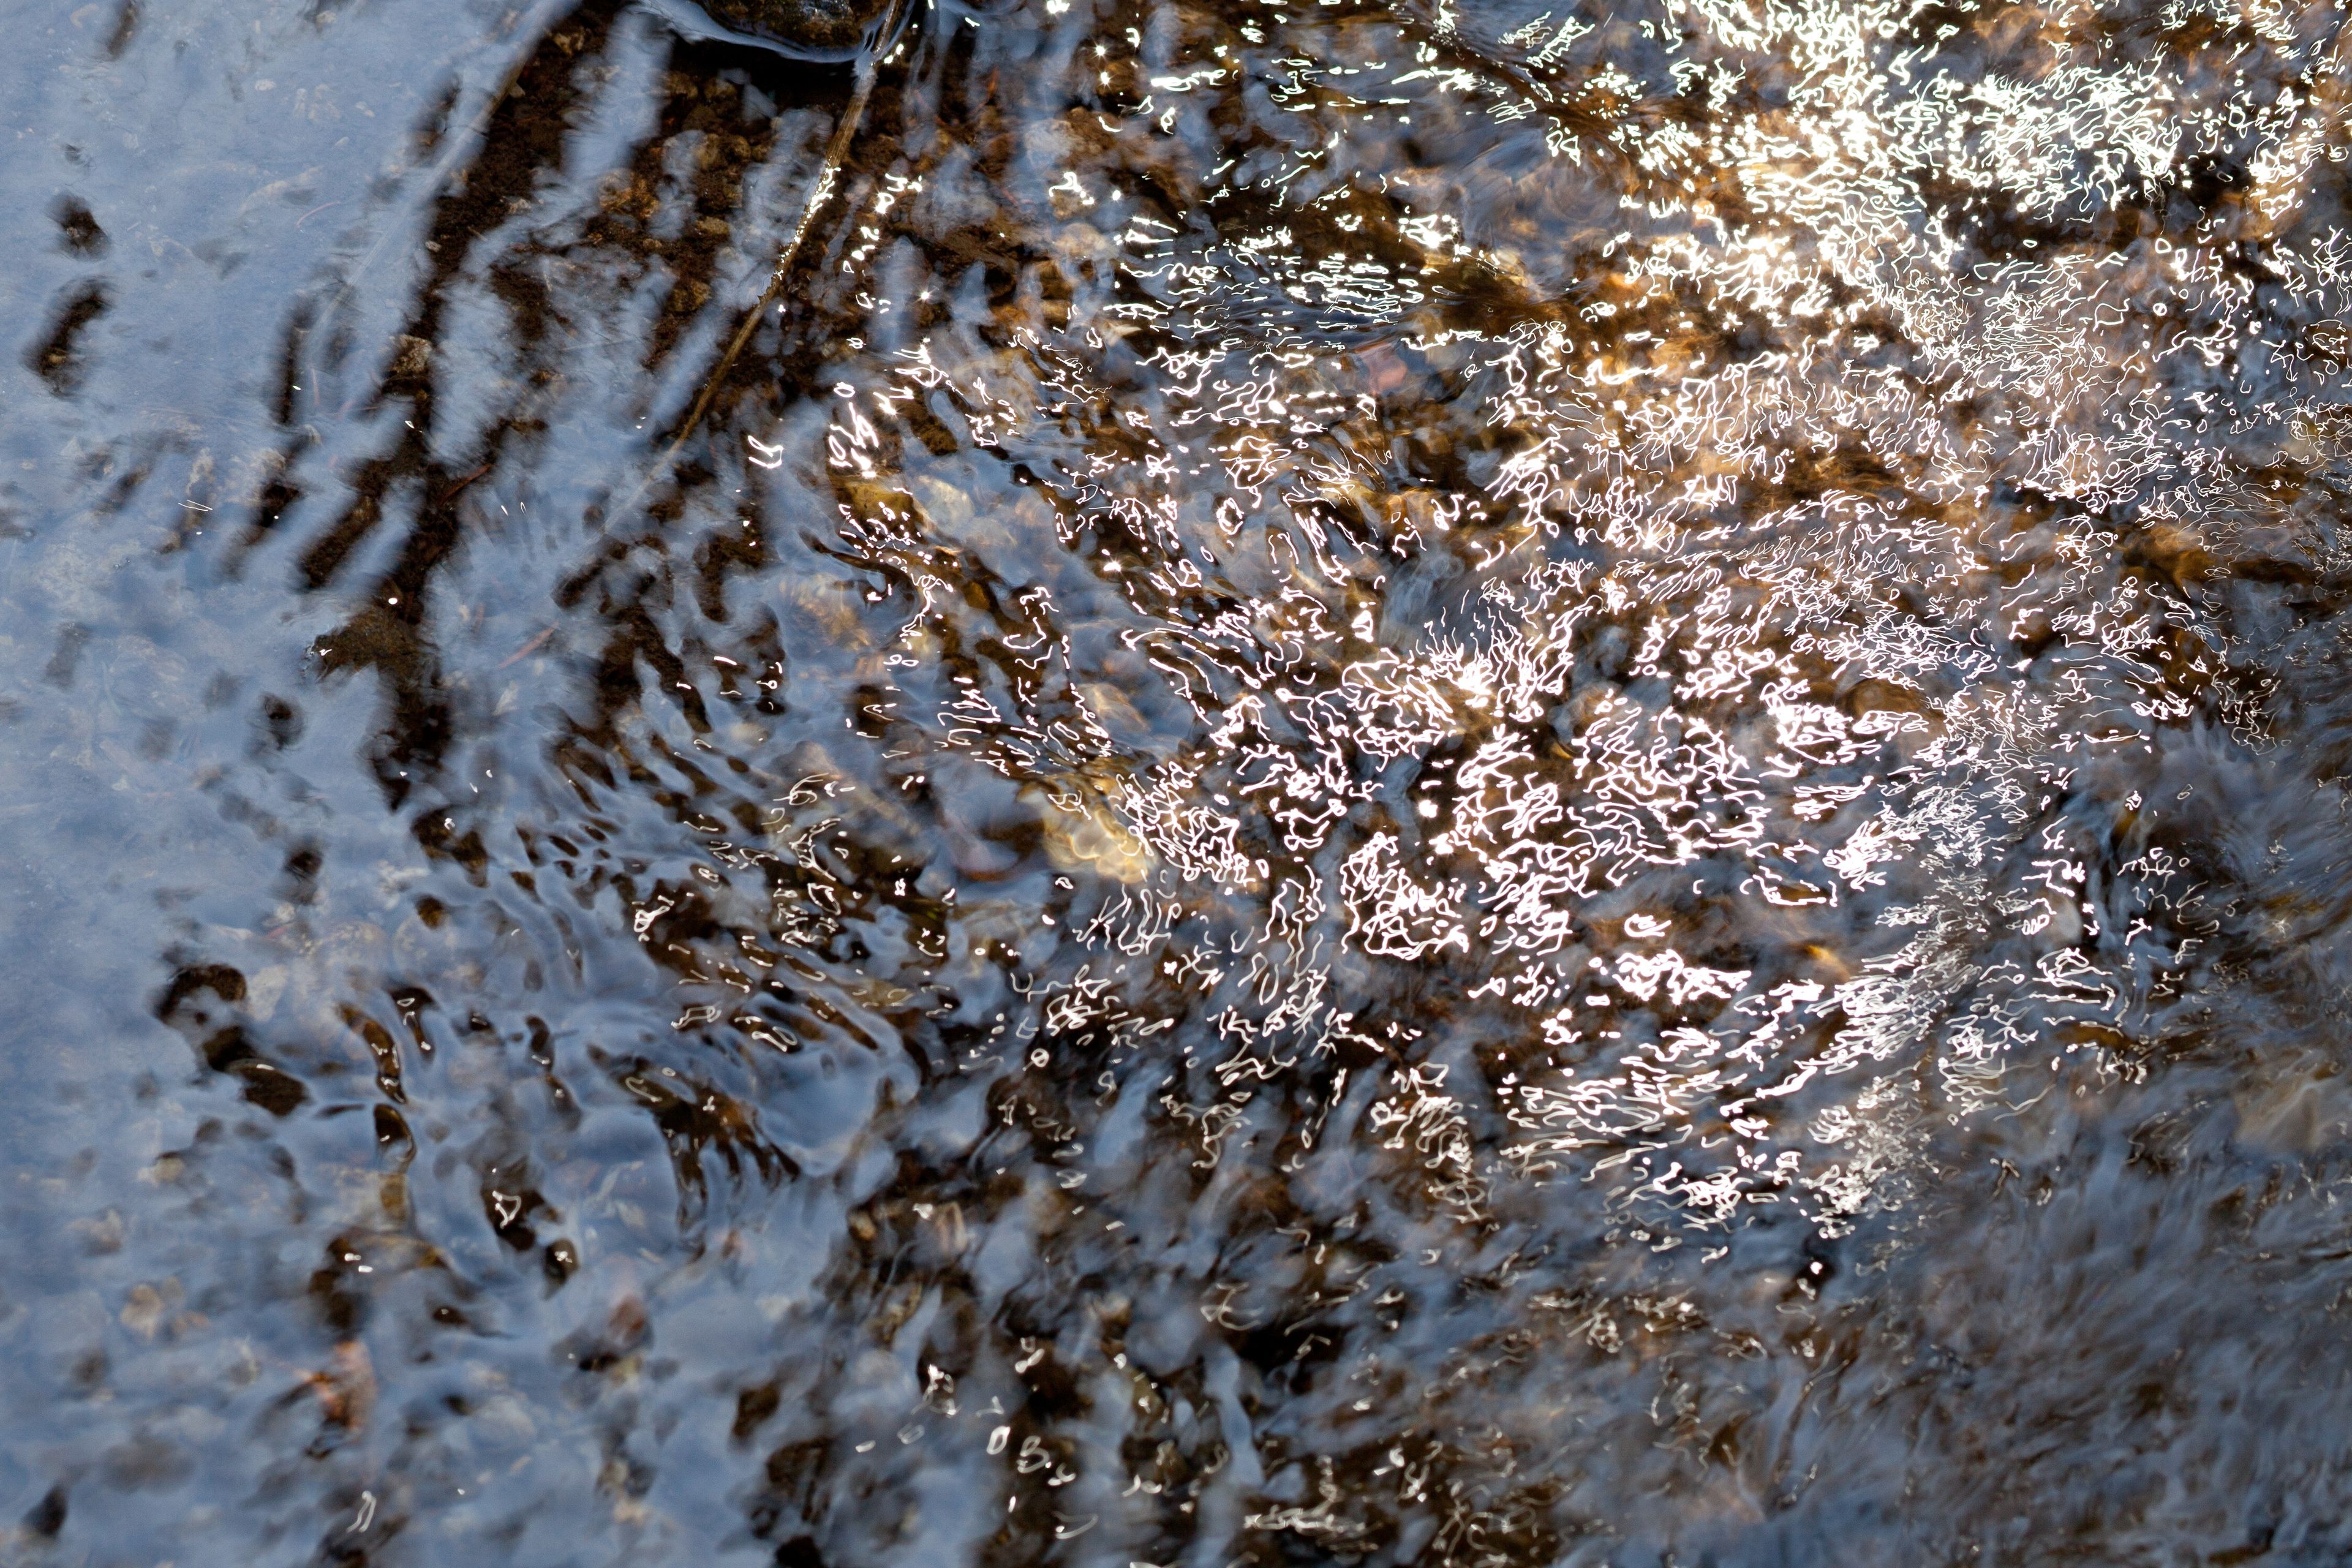 Small ripples in opaque river water, barely showing the stones below.